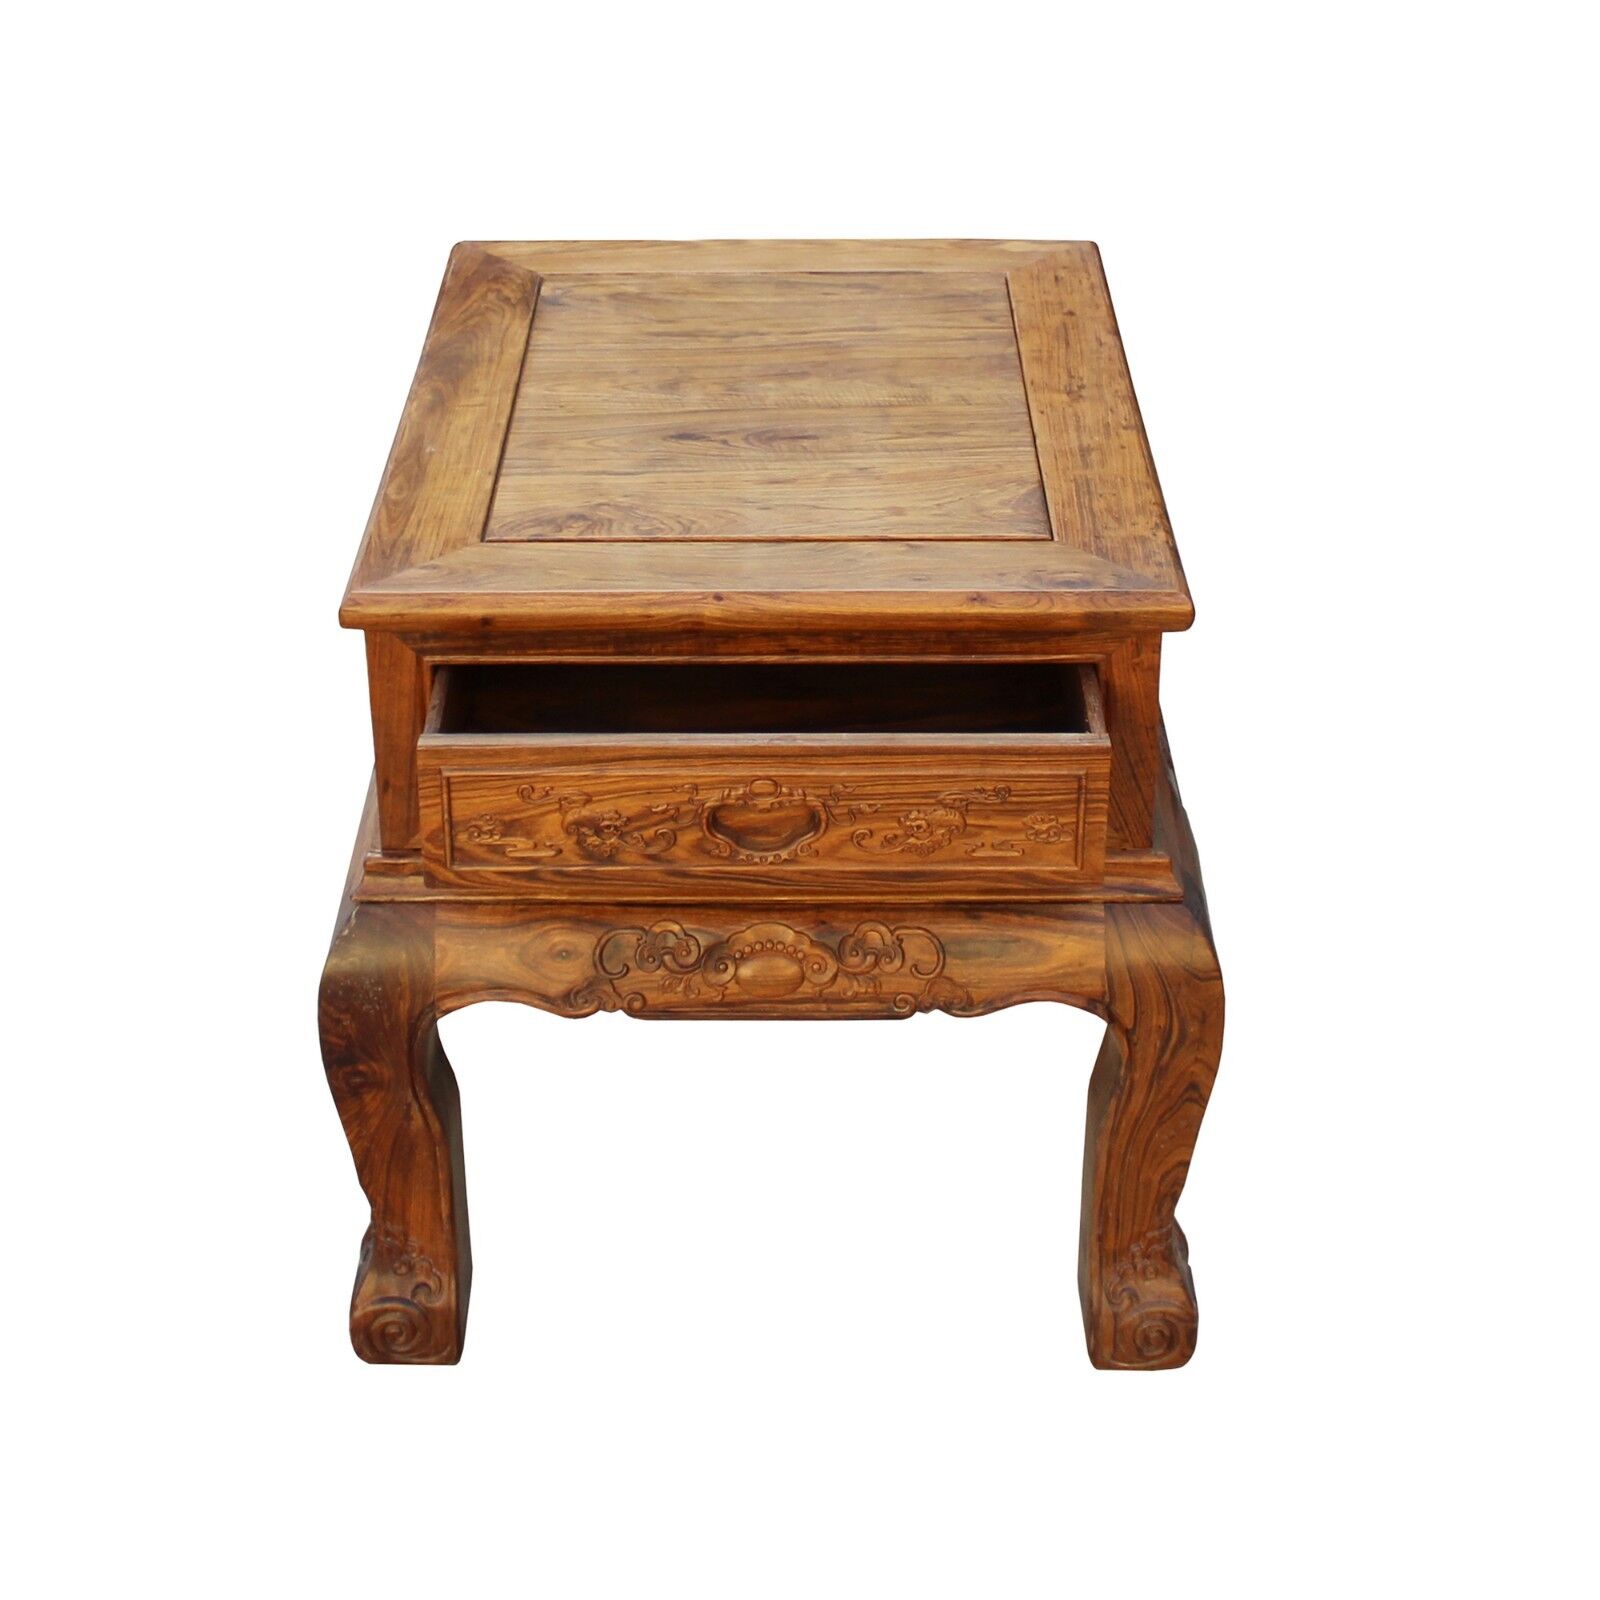 Chinese Oriental Huali Rosewood Flower Motif Tea Table Stand cs4579 Handmade Does Not Apply - фотография #6